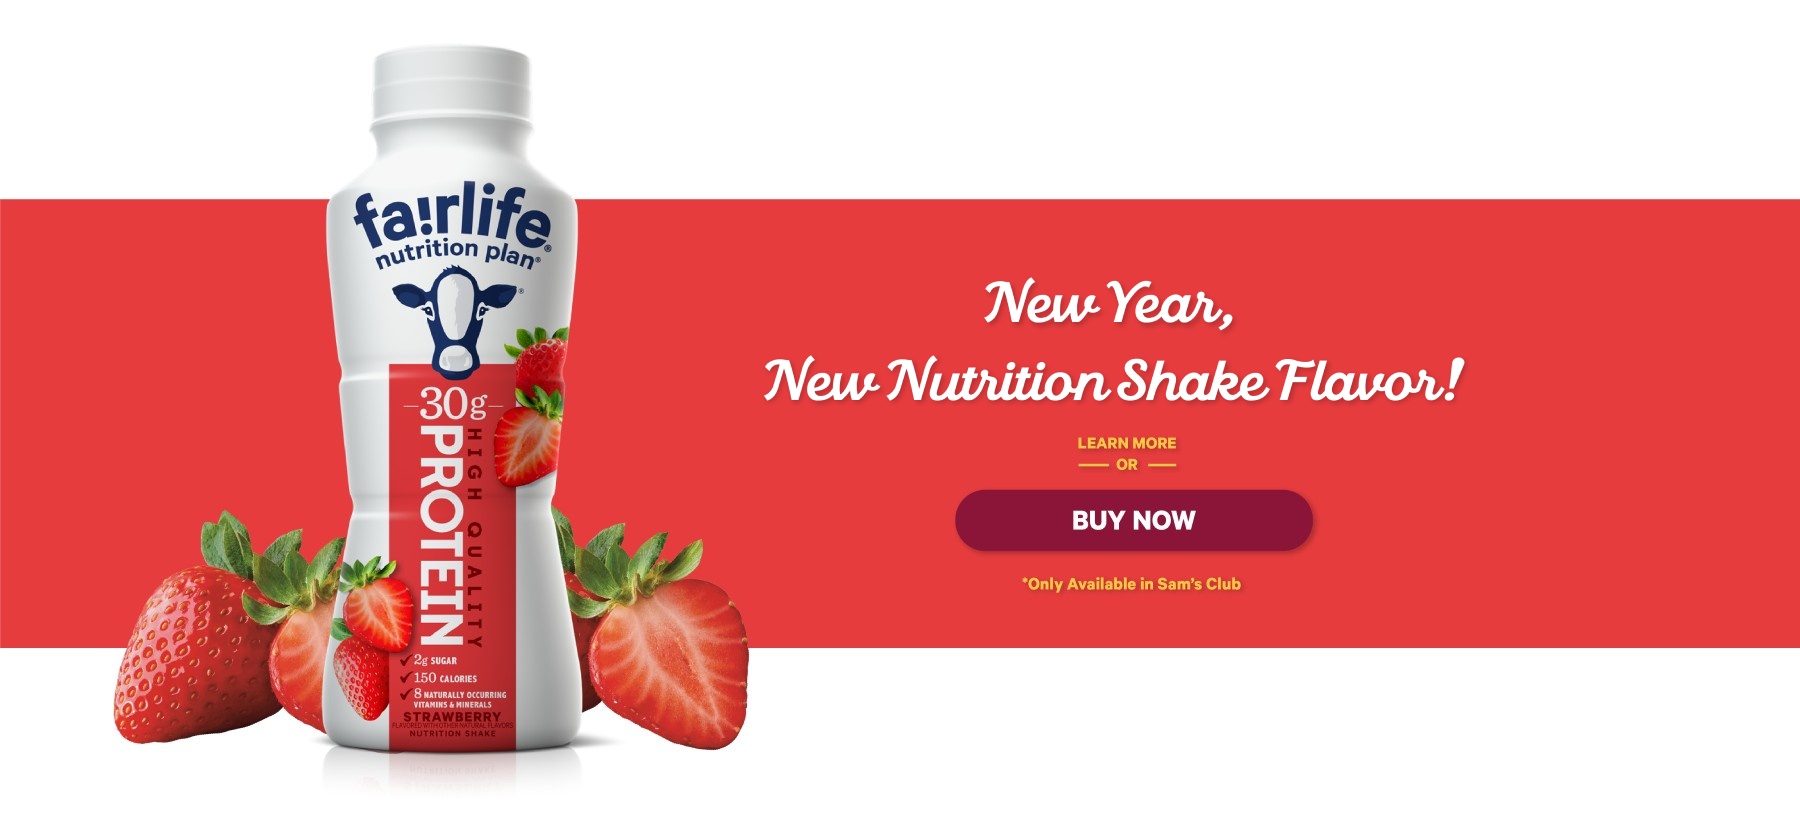 New Flavor, New Nutrition Shake Flavor! Learn More or Buy Now. Only Available in Sam's Club